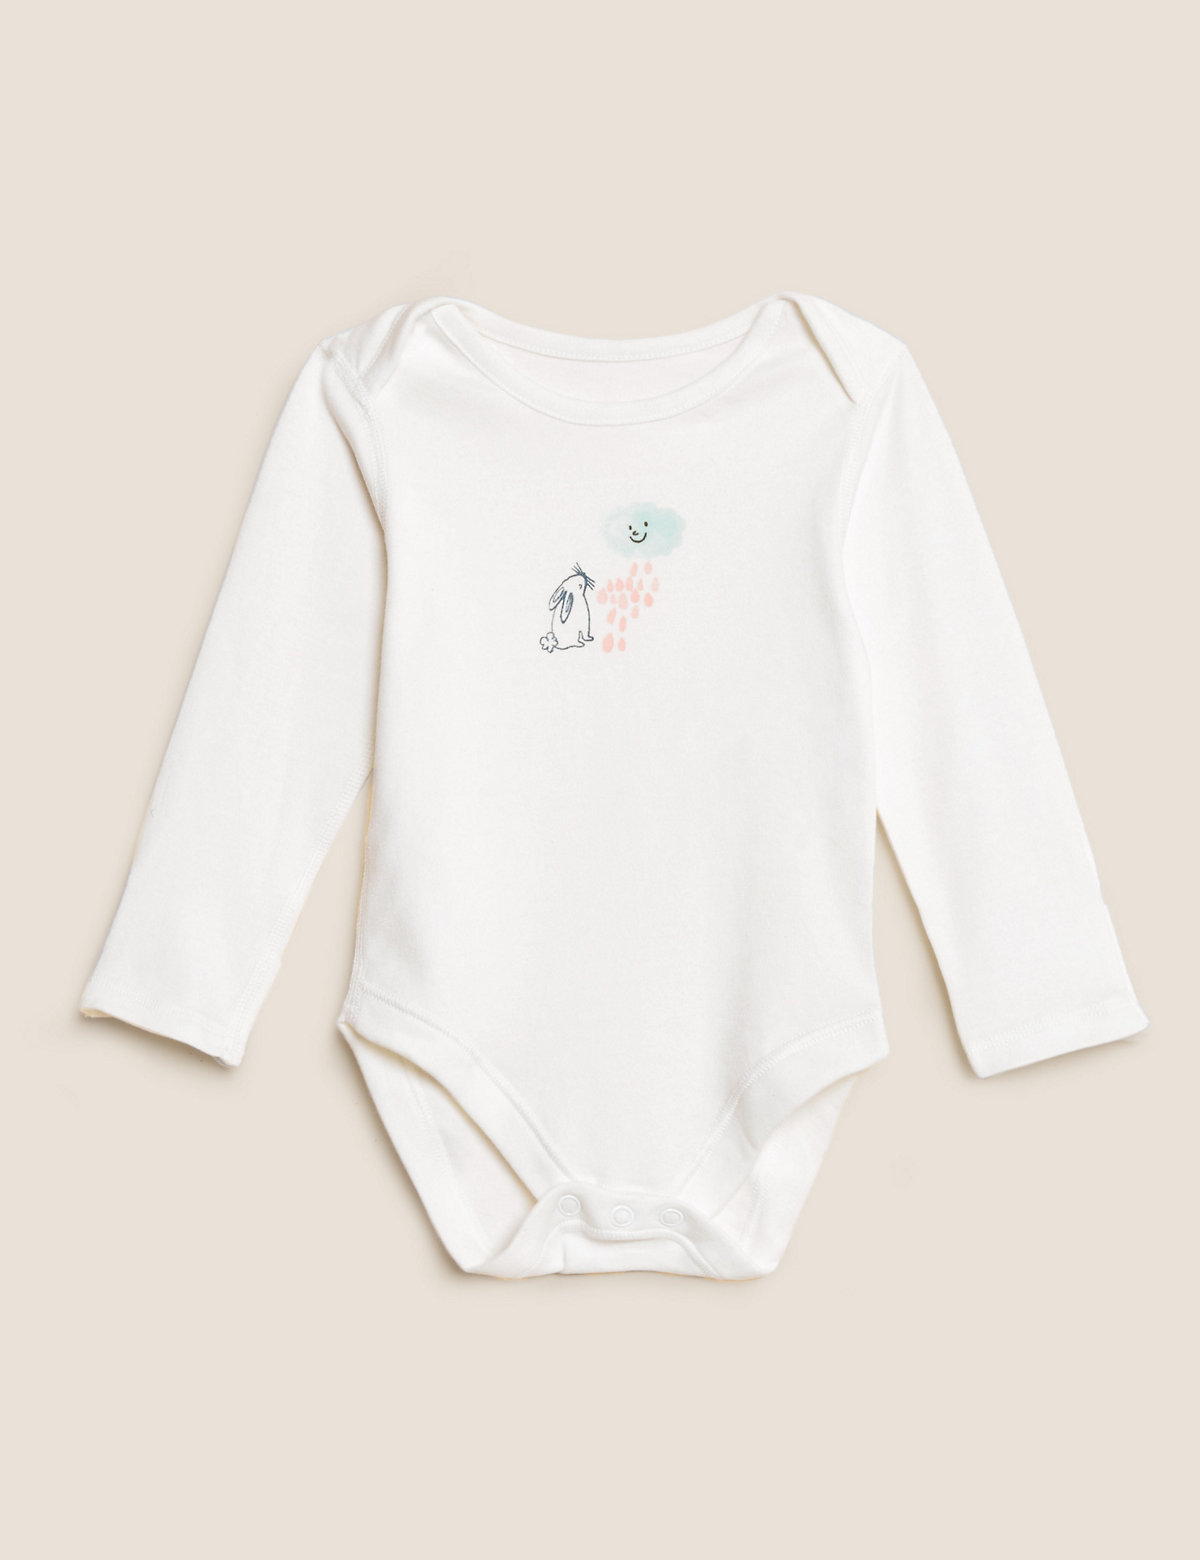 5pk Pure Cotton Patterned Bodysuits (61/2lbs - 3 Yrs)